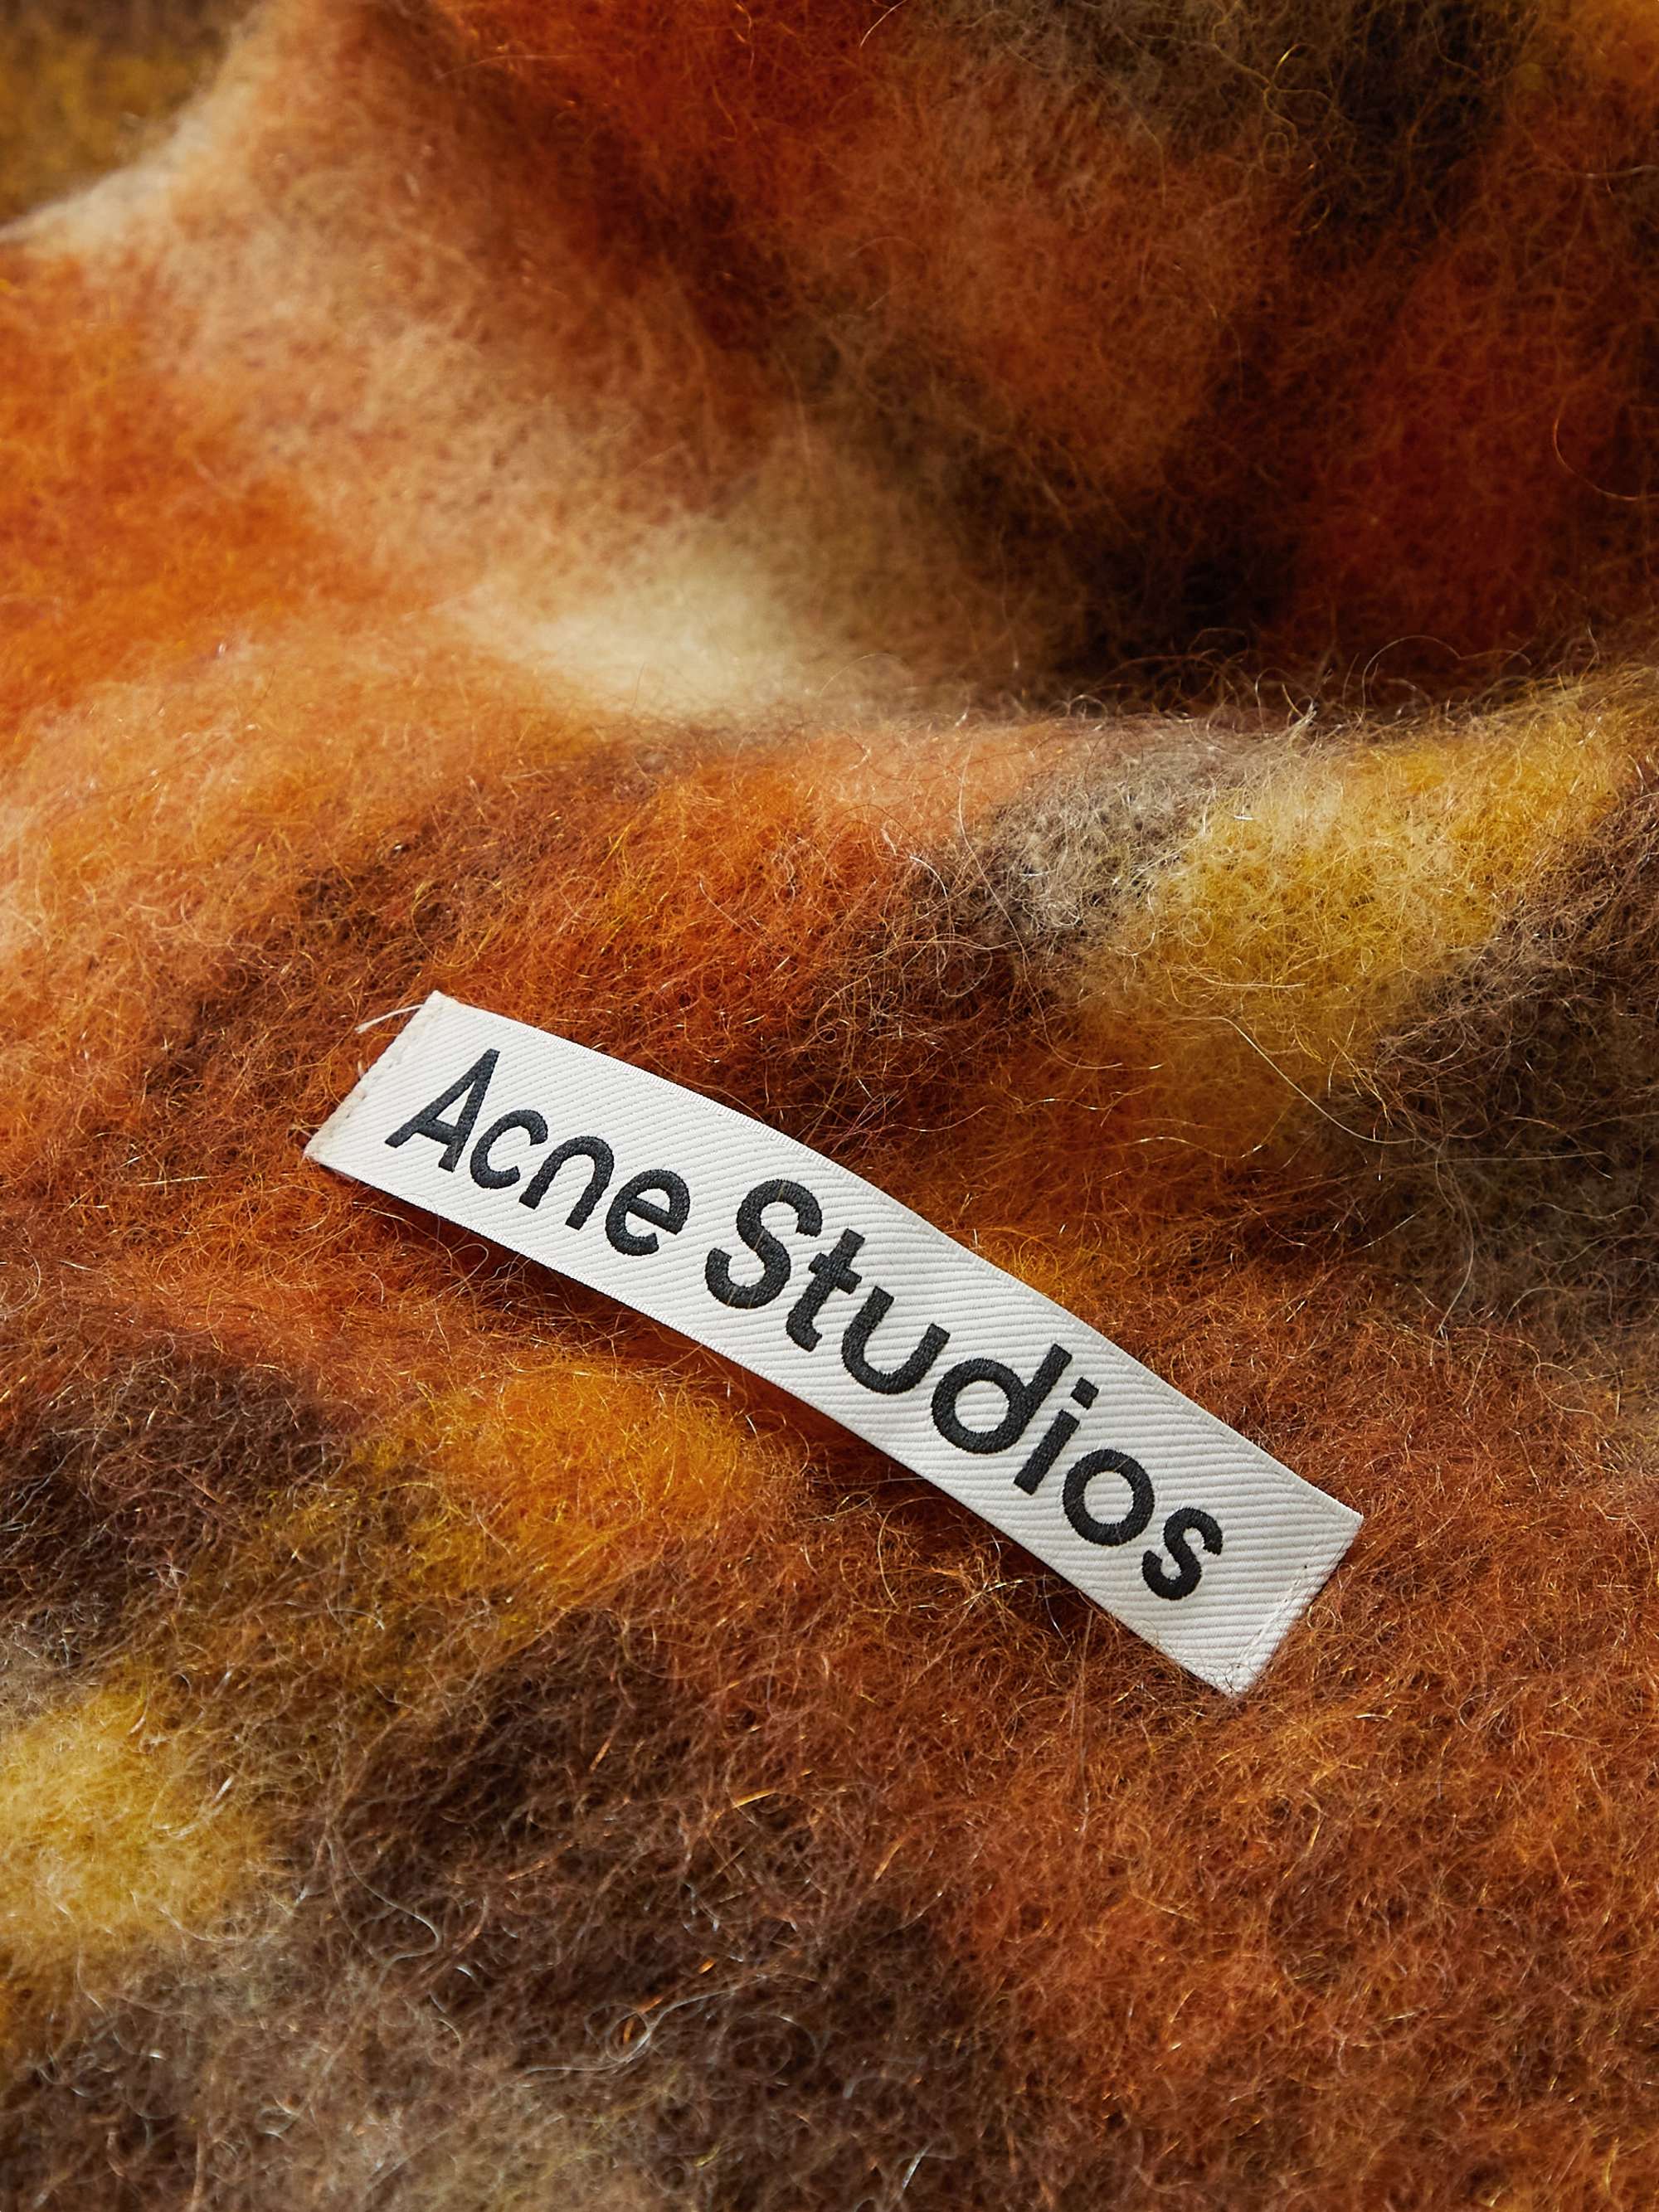 ACNE STUDIOS Checked Textured-Knit Scarf